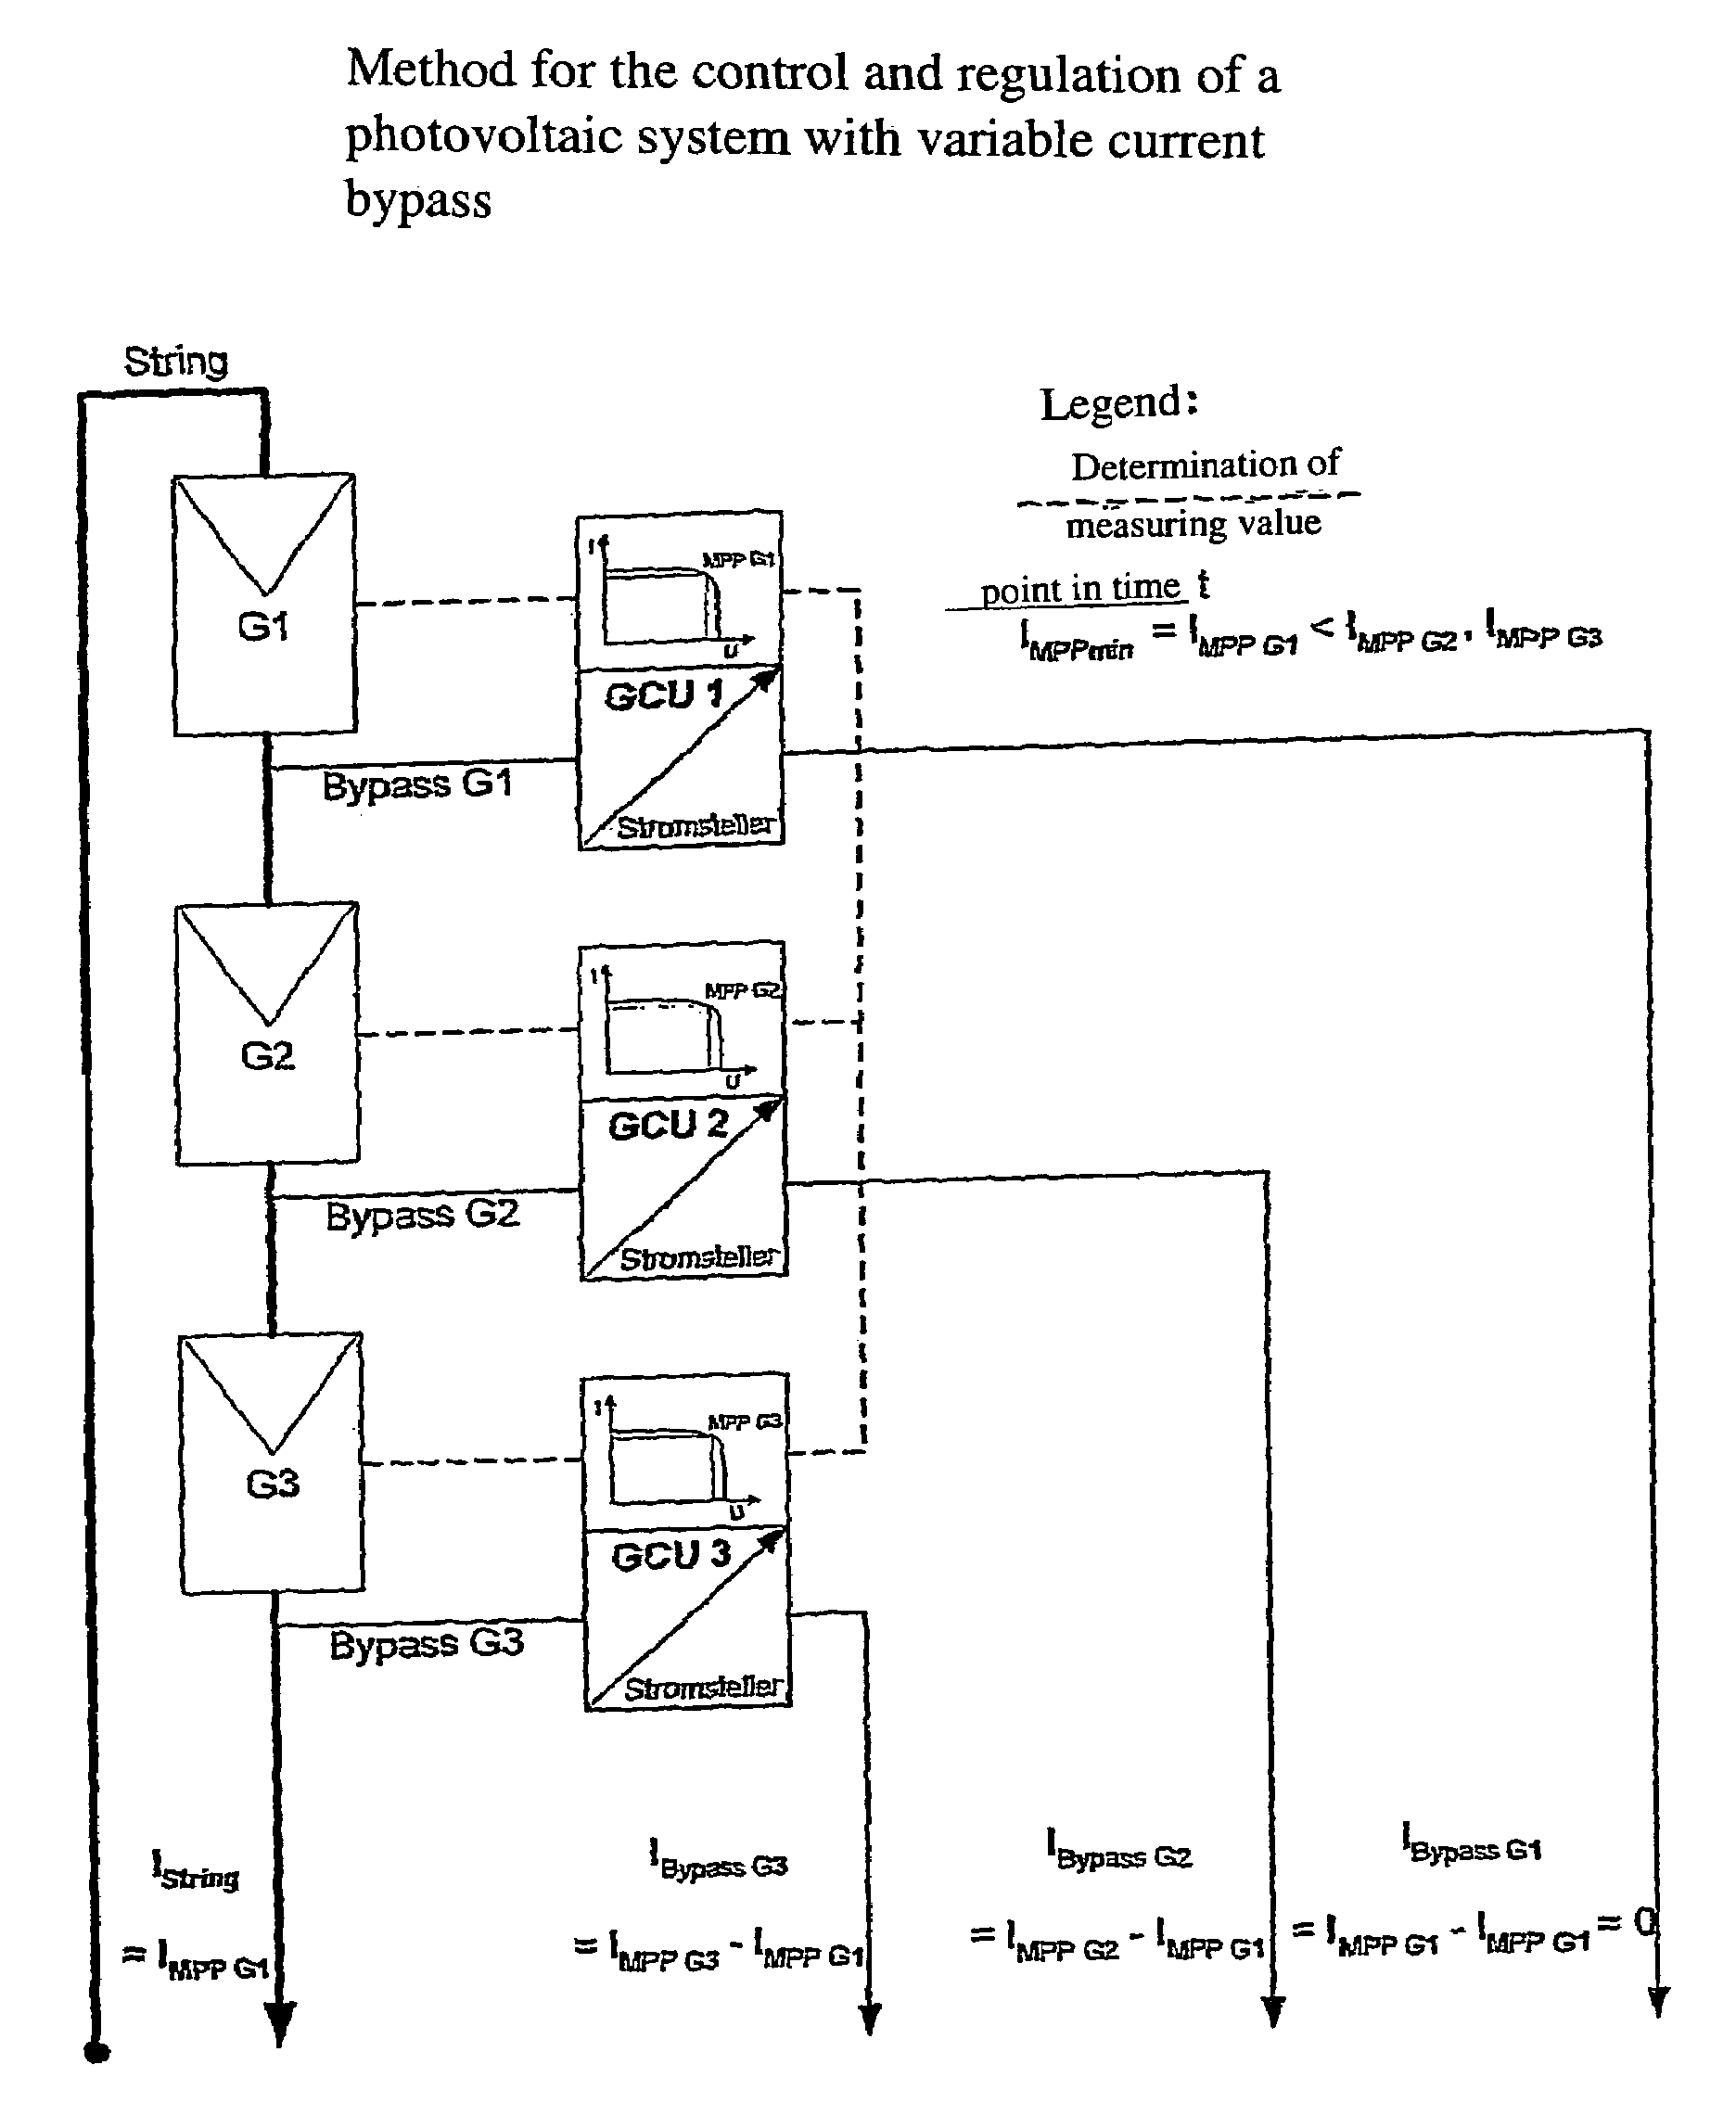 Circuit arrangement for a photovoltaic system